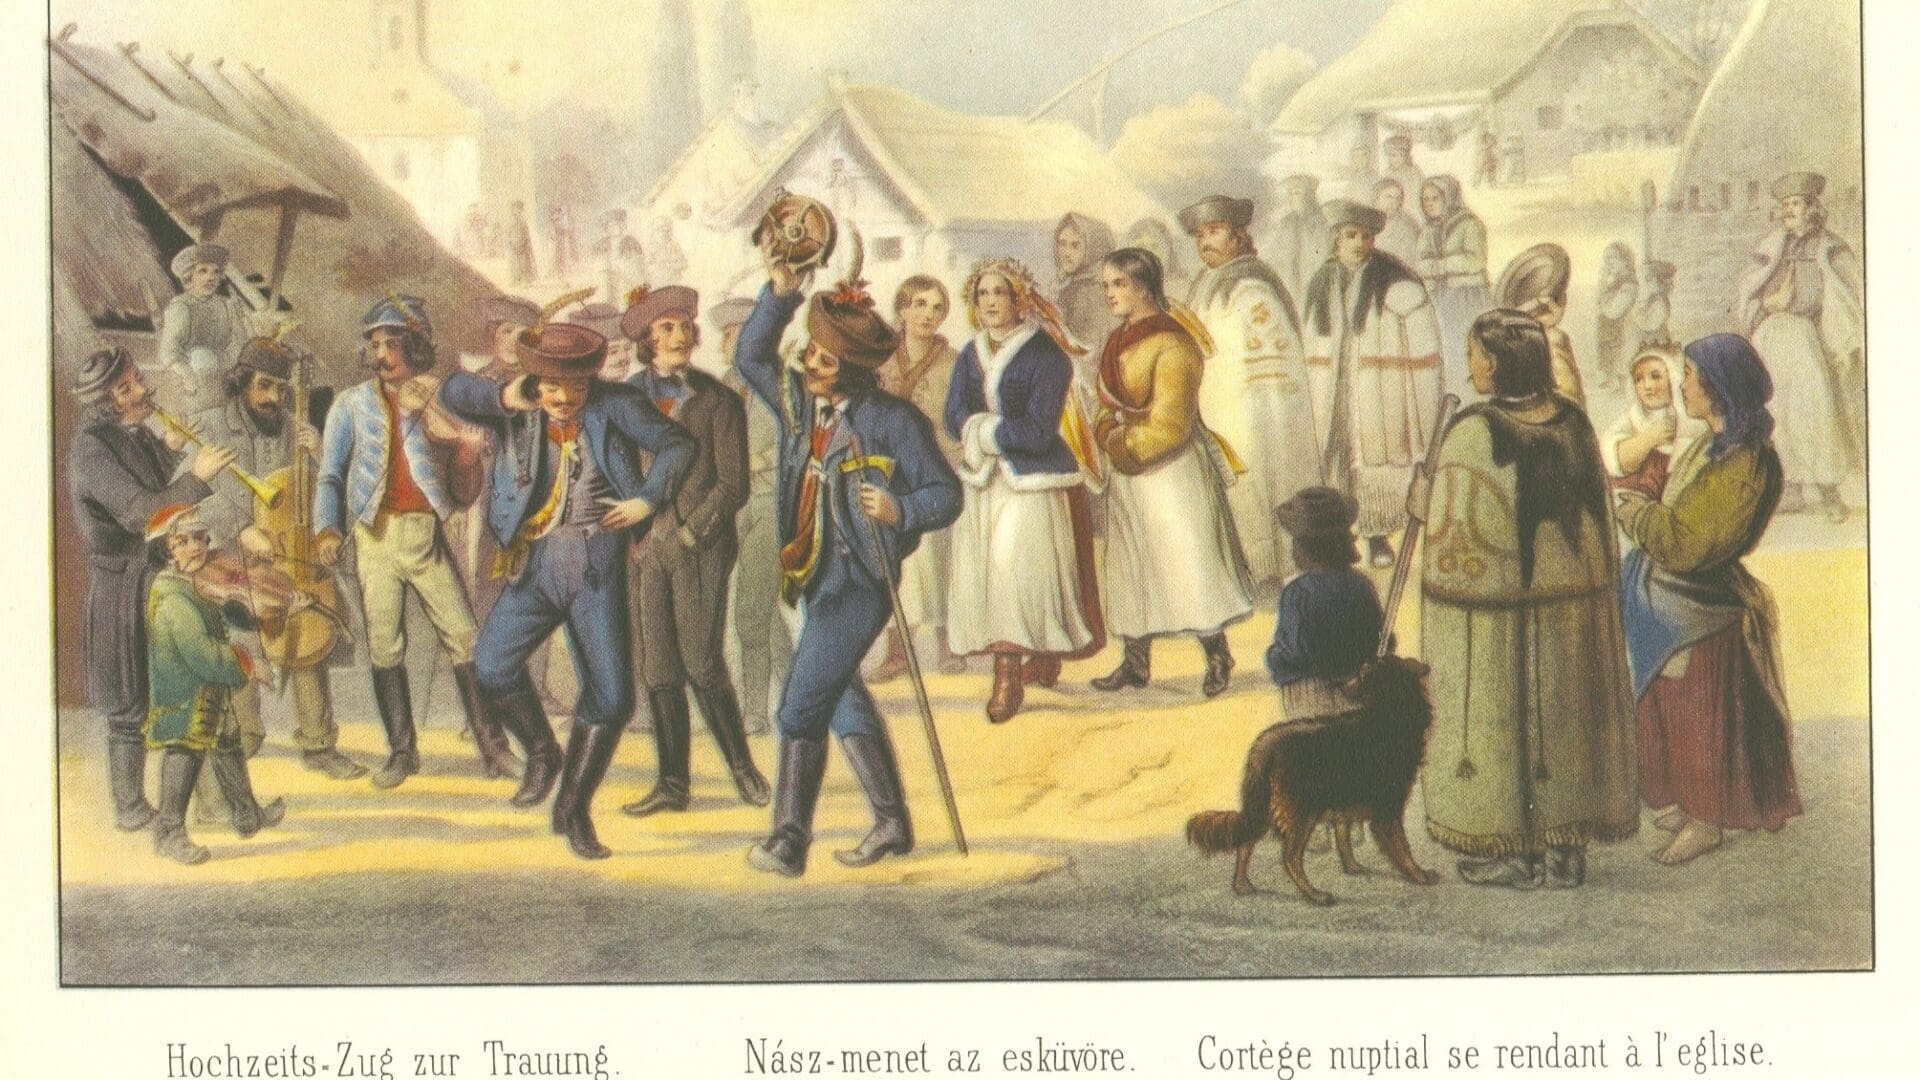 Nuptial procession by Károly Sterio (colour lithography, 1855). The groomsman is carrying a fokos.